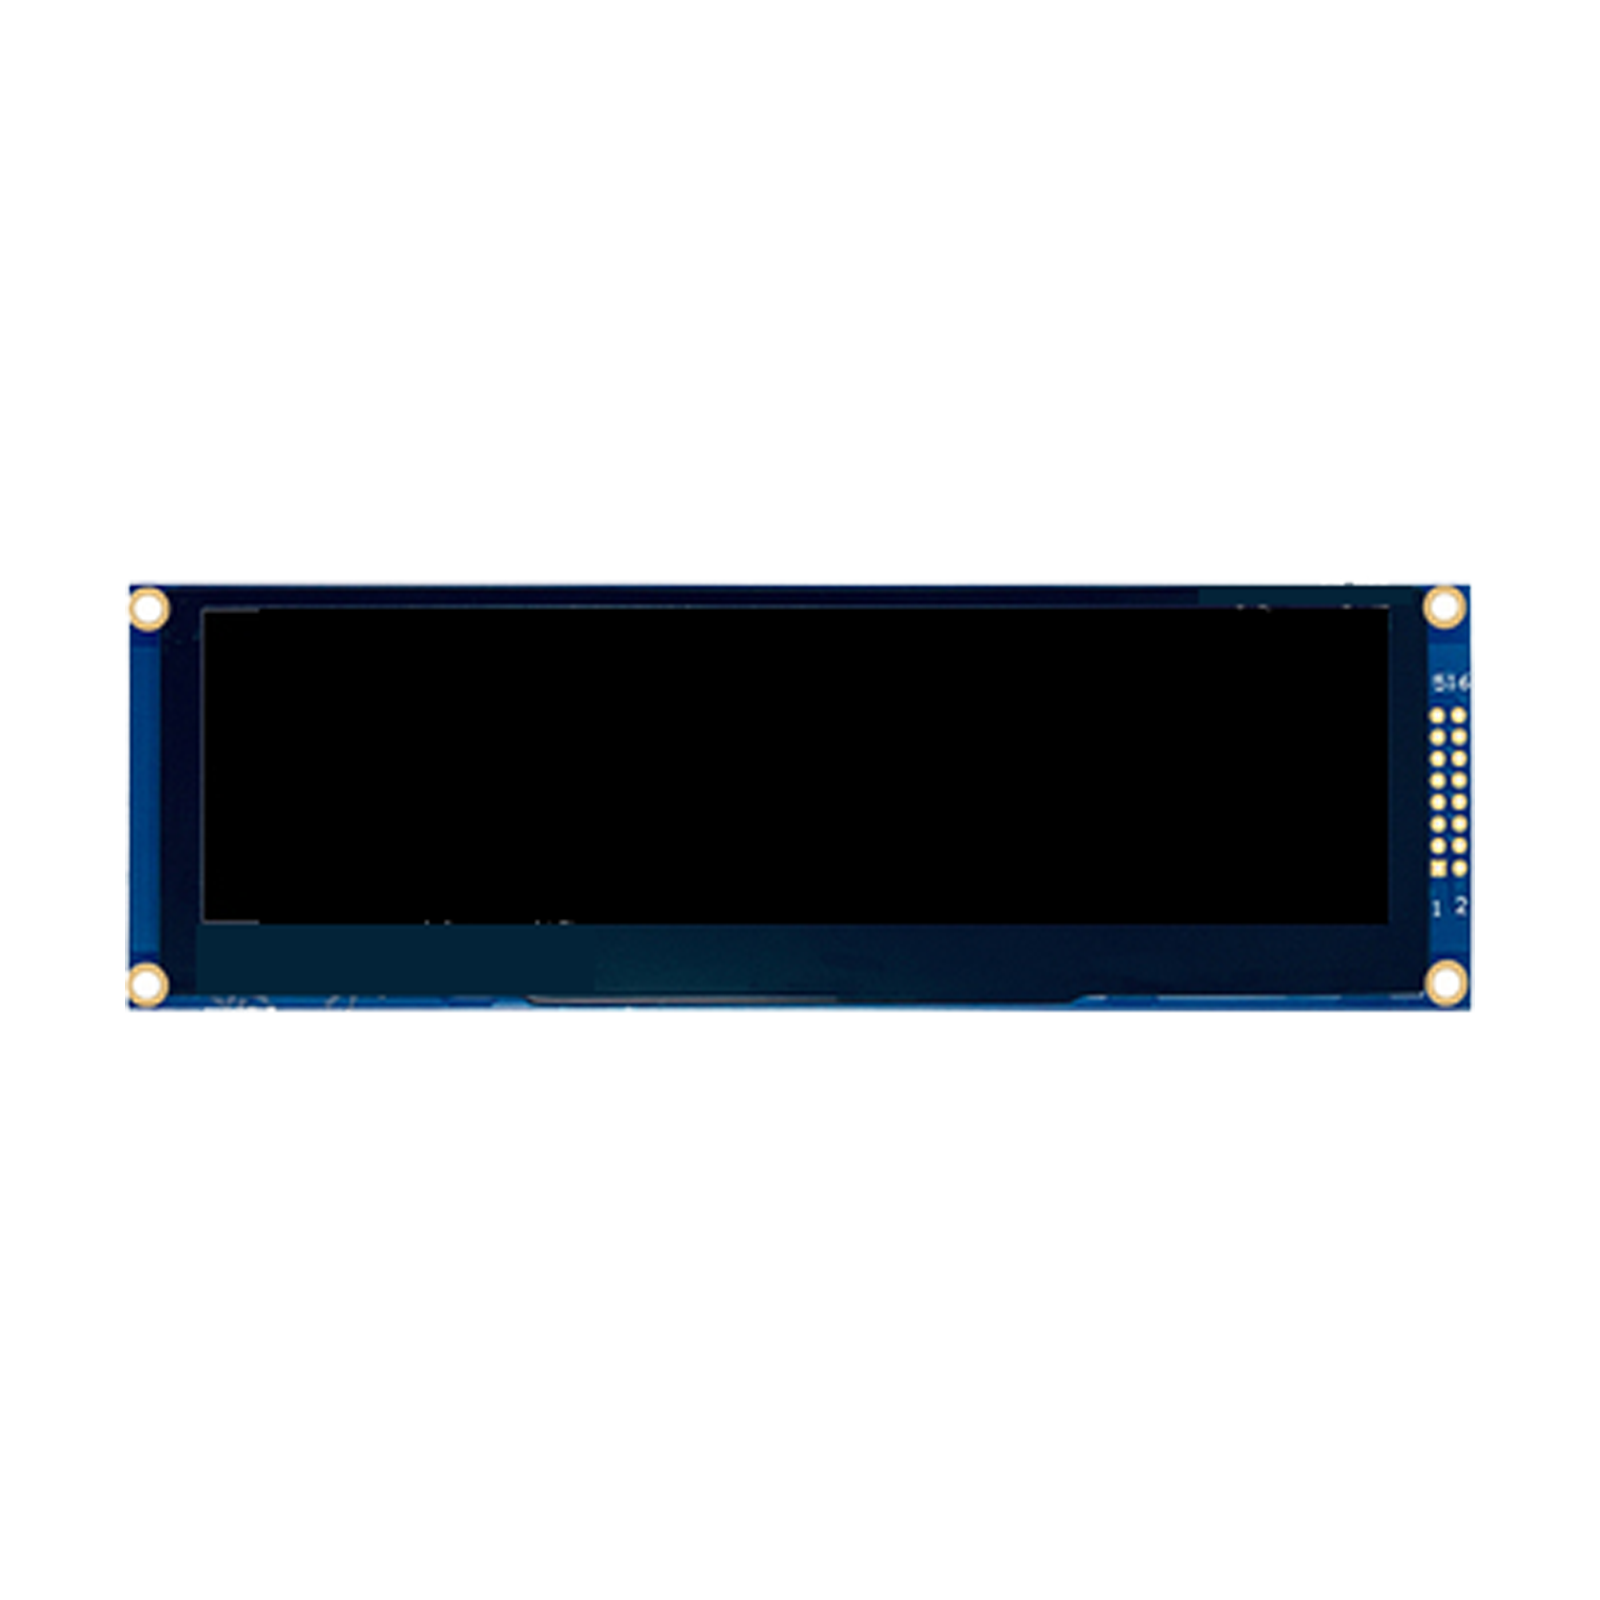 5.5-inch OLED graphic display module with 256x64 resolution, connected via SPI